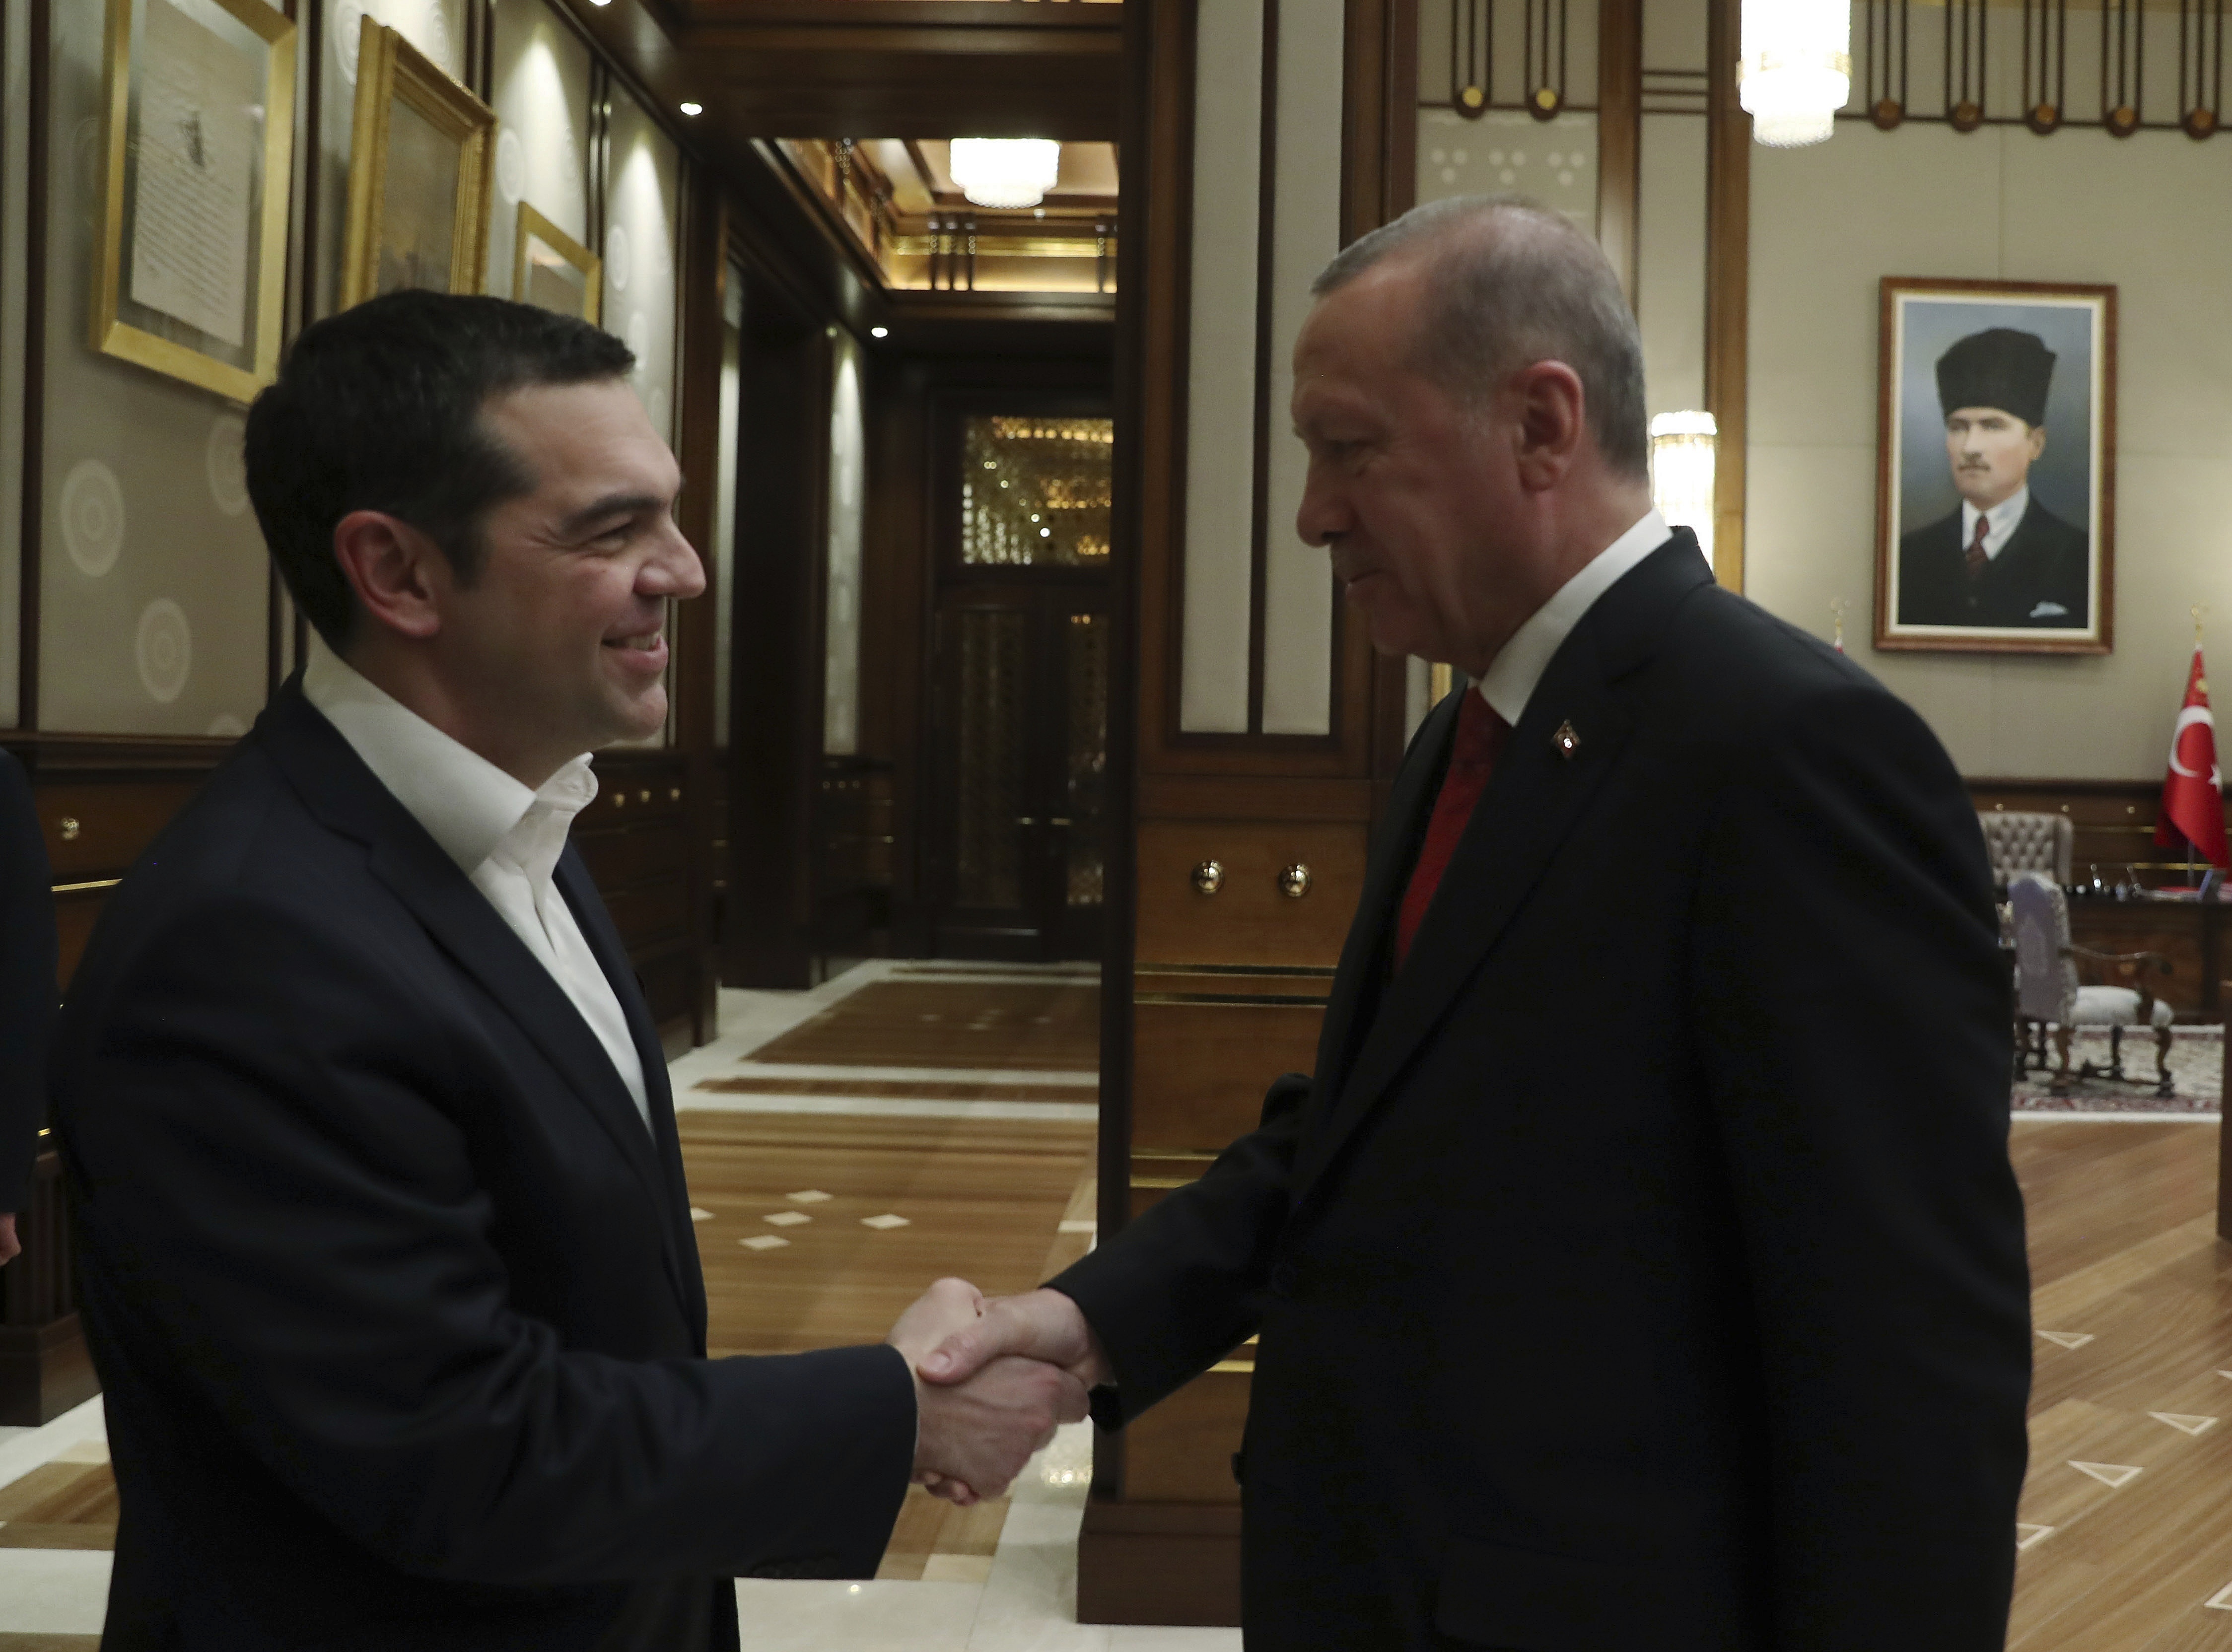 Turkey's President Recep Tayyip Erdogan, right, shakes hands with Greece's Prime Minister Alexis Tsipras during their meeting in Ankara, Tuesday, Feb. 5, 2019. A two-day visit by Greek Prime Minister Alexis Tsipras to Turkey got off to a shaky start Tuesday after Turkey put up bounties for the capture of eight Turkish servicemen who fled to Greece following a failed coup in 2016. (Presidential Press Service via AP, Pool)